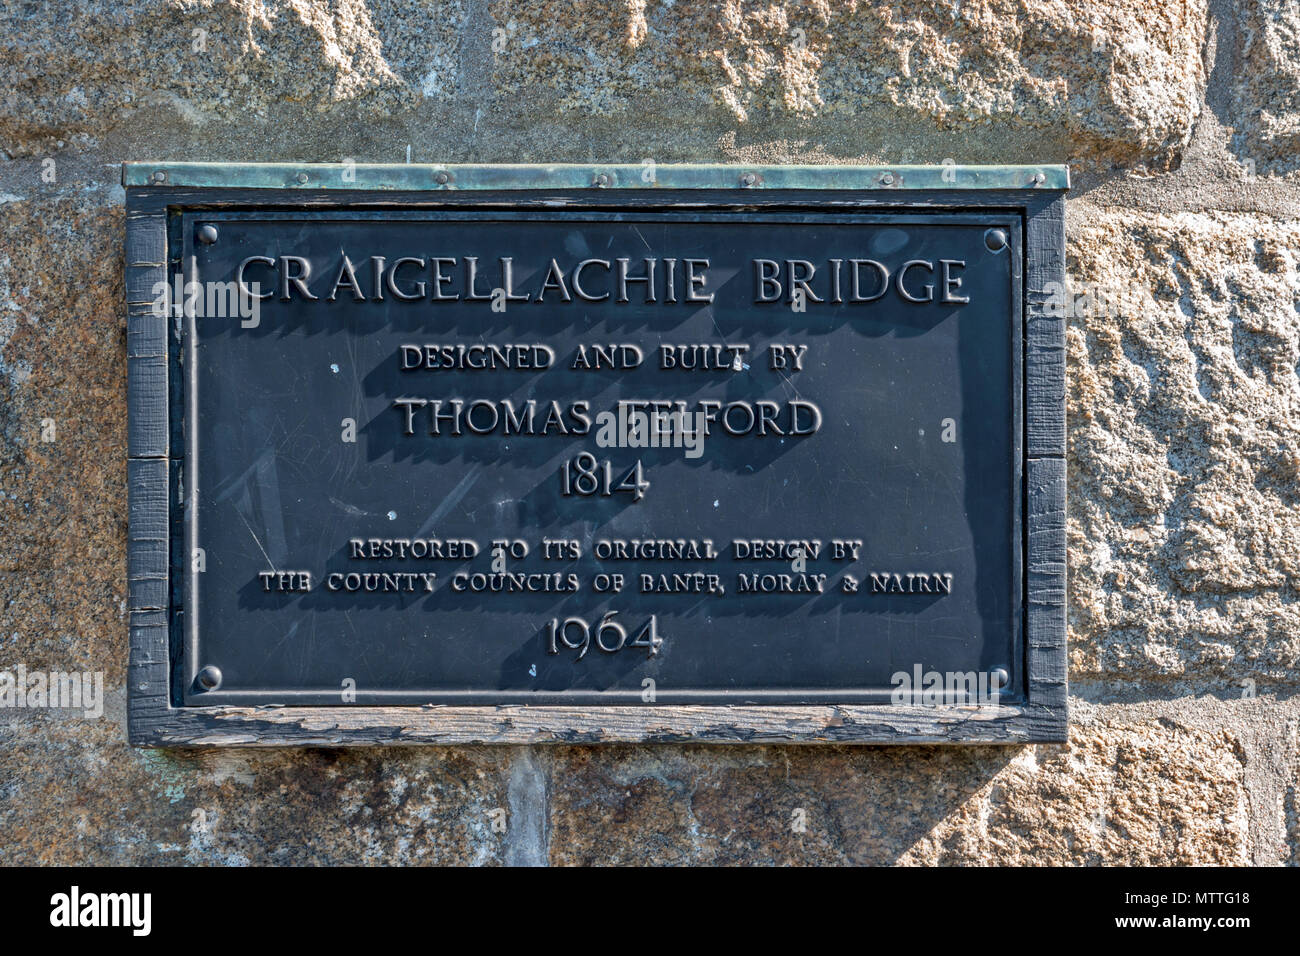 THOMAS TELFORD BRIDGE AT CRAIGELLACHIE SCOTLAND A TOWER WITH COUNTY COUNCIL PLAQUE SHOWING BRIDGE MANUFACTURE INFORMATION Stock Photo